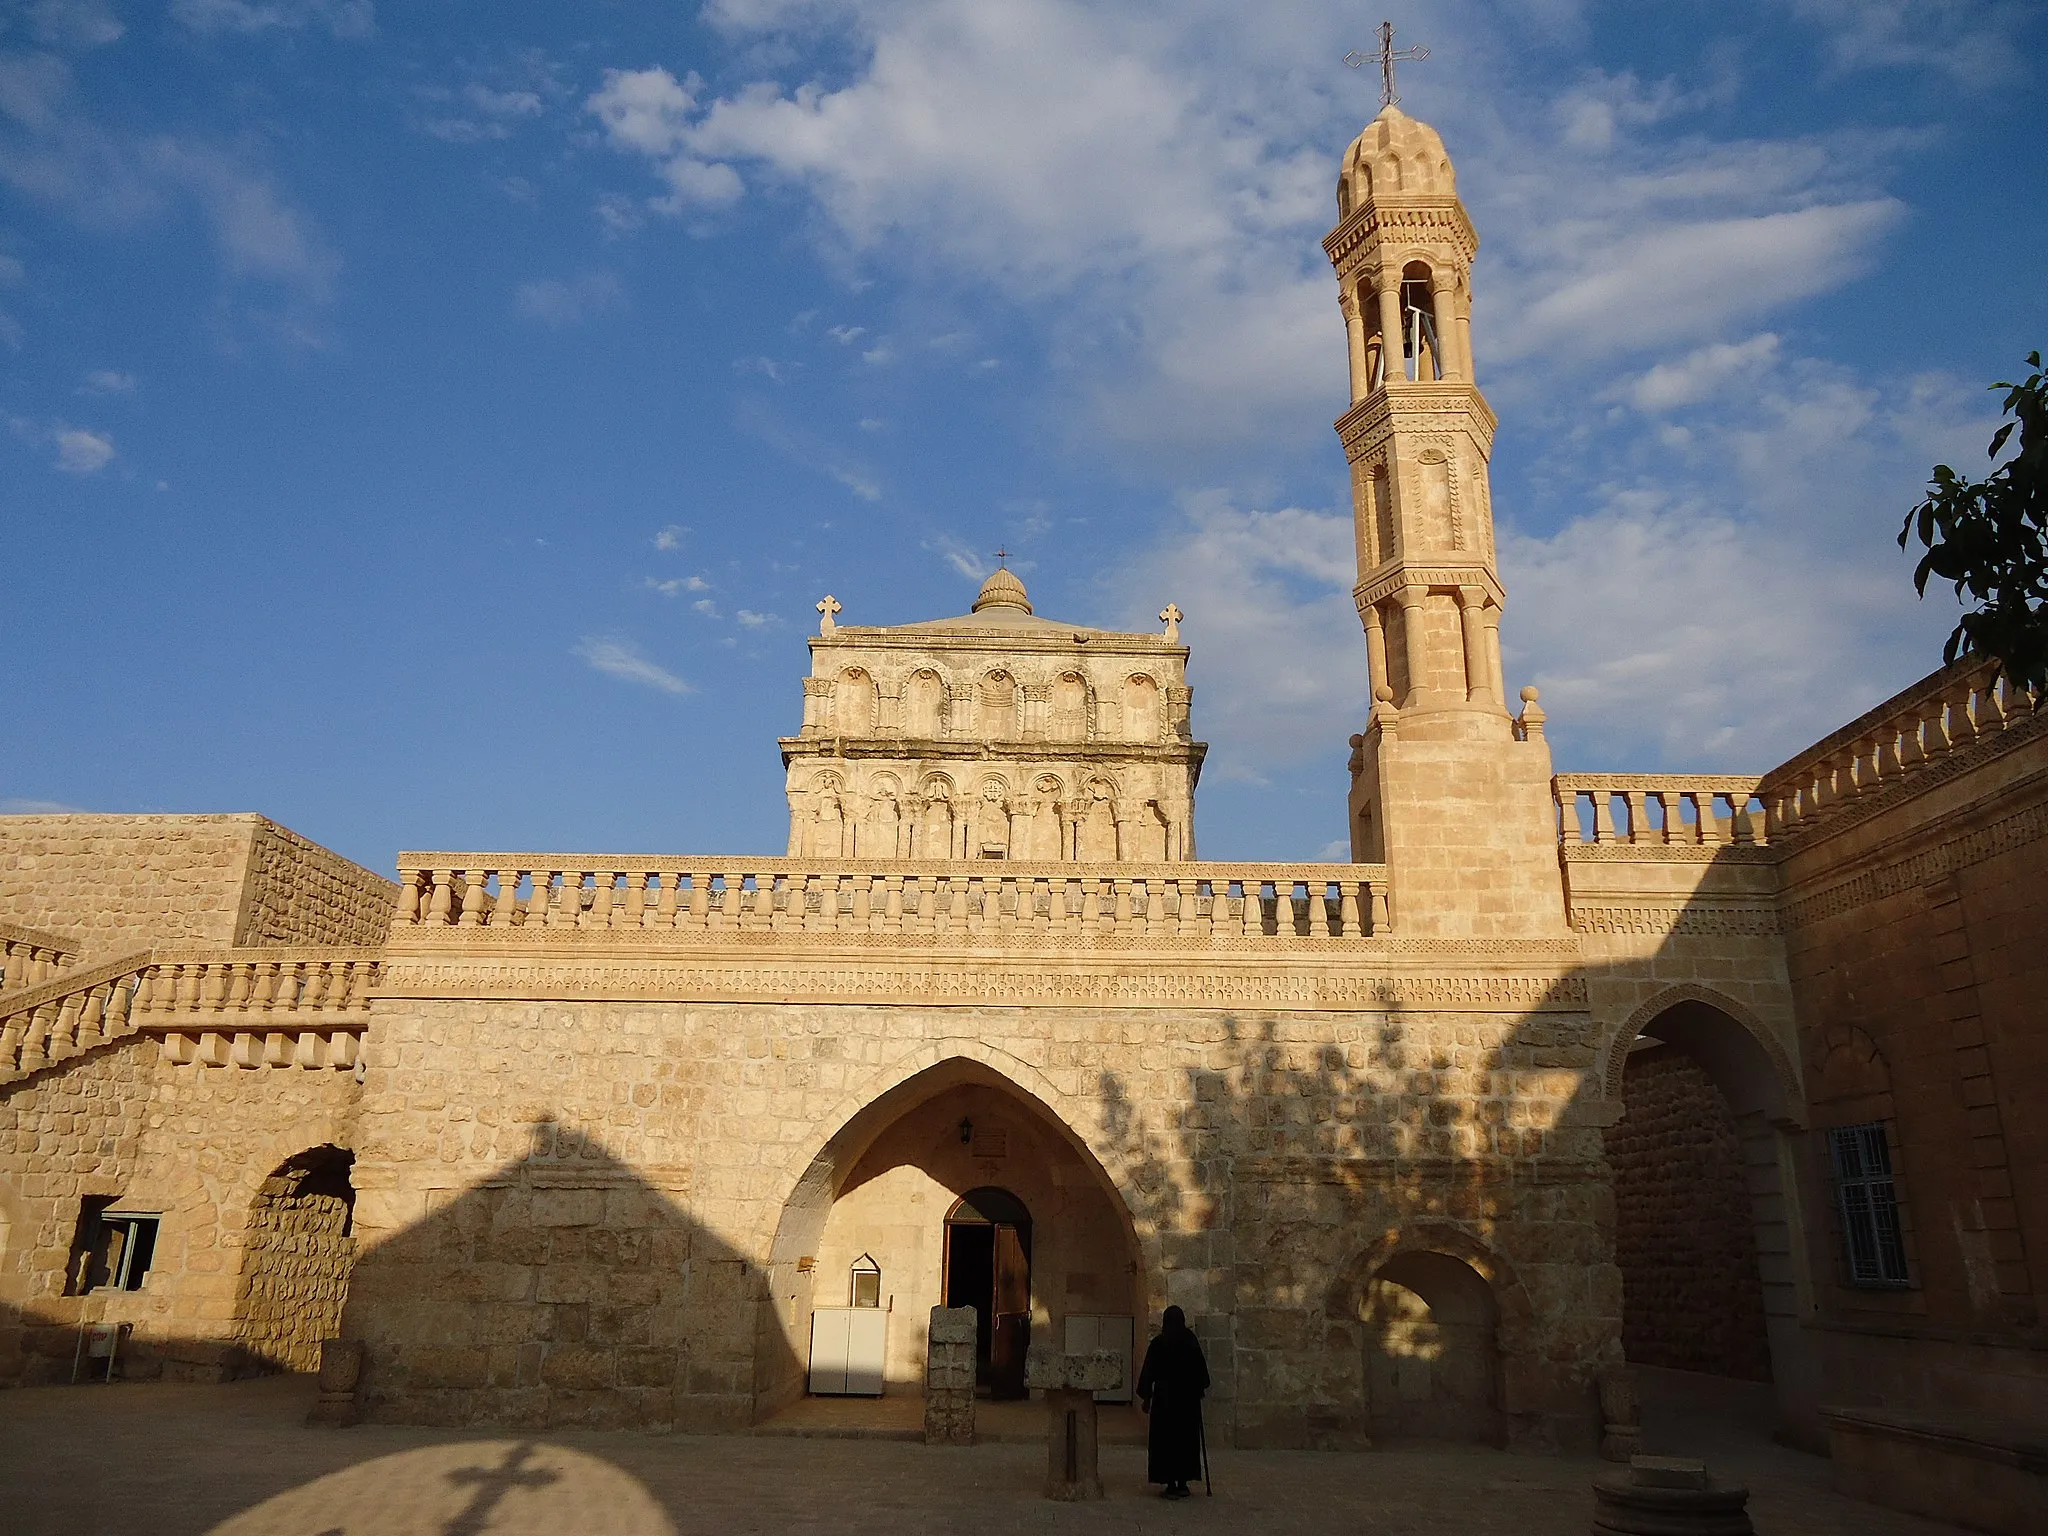 Photo showing: On a website (https://mardin.ktb.gov.tr/TR-311718/anitli-meryem-ana-kilisesi.html ) one can read "The church, unique from an architectural point of view, is located in the southern part of Anıtlı Village. The temple named as Yoldath Aloho (Mother of God); often referred to as Al Harda (virgin) in Arabic.
The construction date of the church associated with the birth of Jesus. It is thought that the structure was initially built as triumphal arch-shaped Roman structure in the 1st century, later converted to church between 5th and 6th centuries. The external superstructure of the dome and the bell tower are 20th century additions. The church resembles the Deyrulzeferan monastery with its square plan and central dome, which is rare in Mardin."